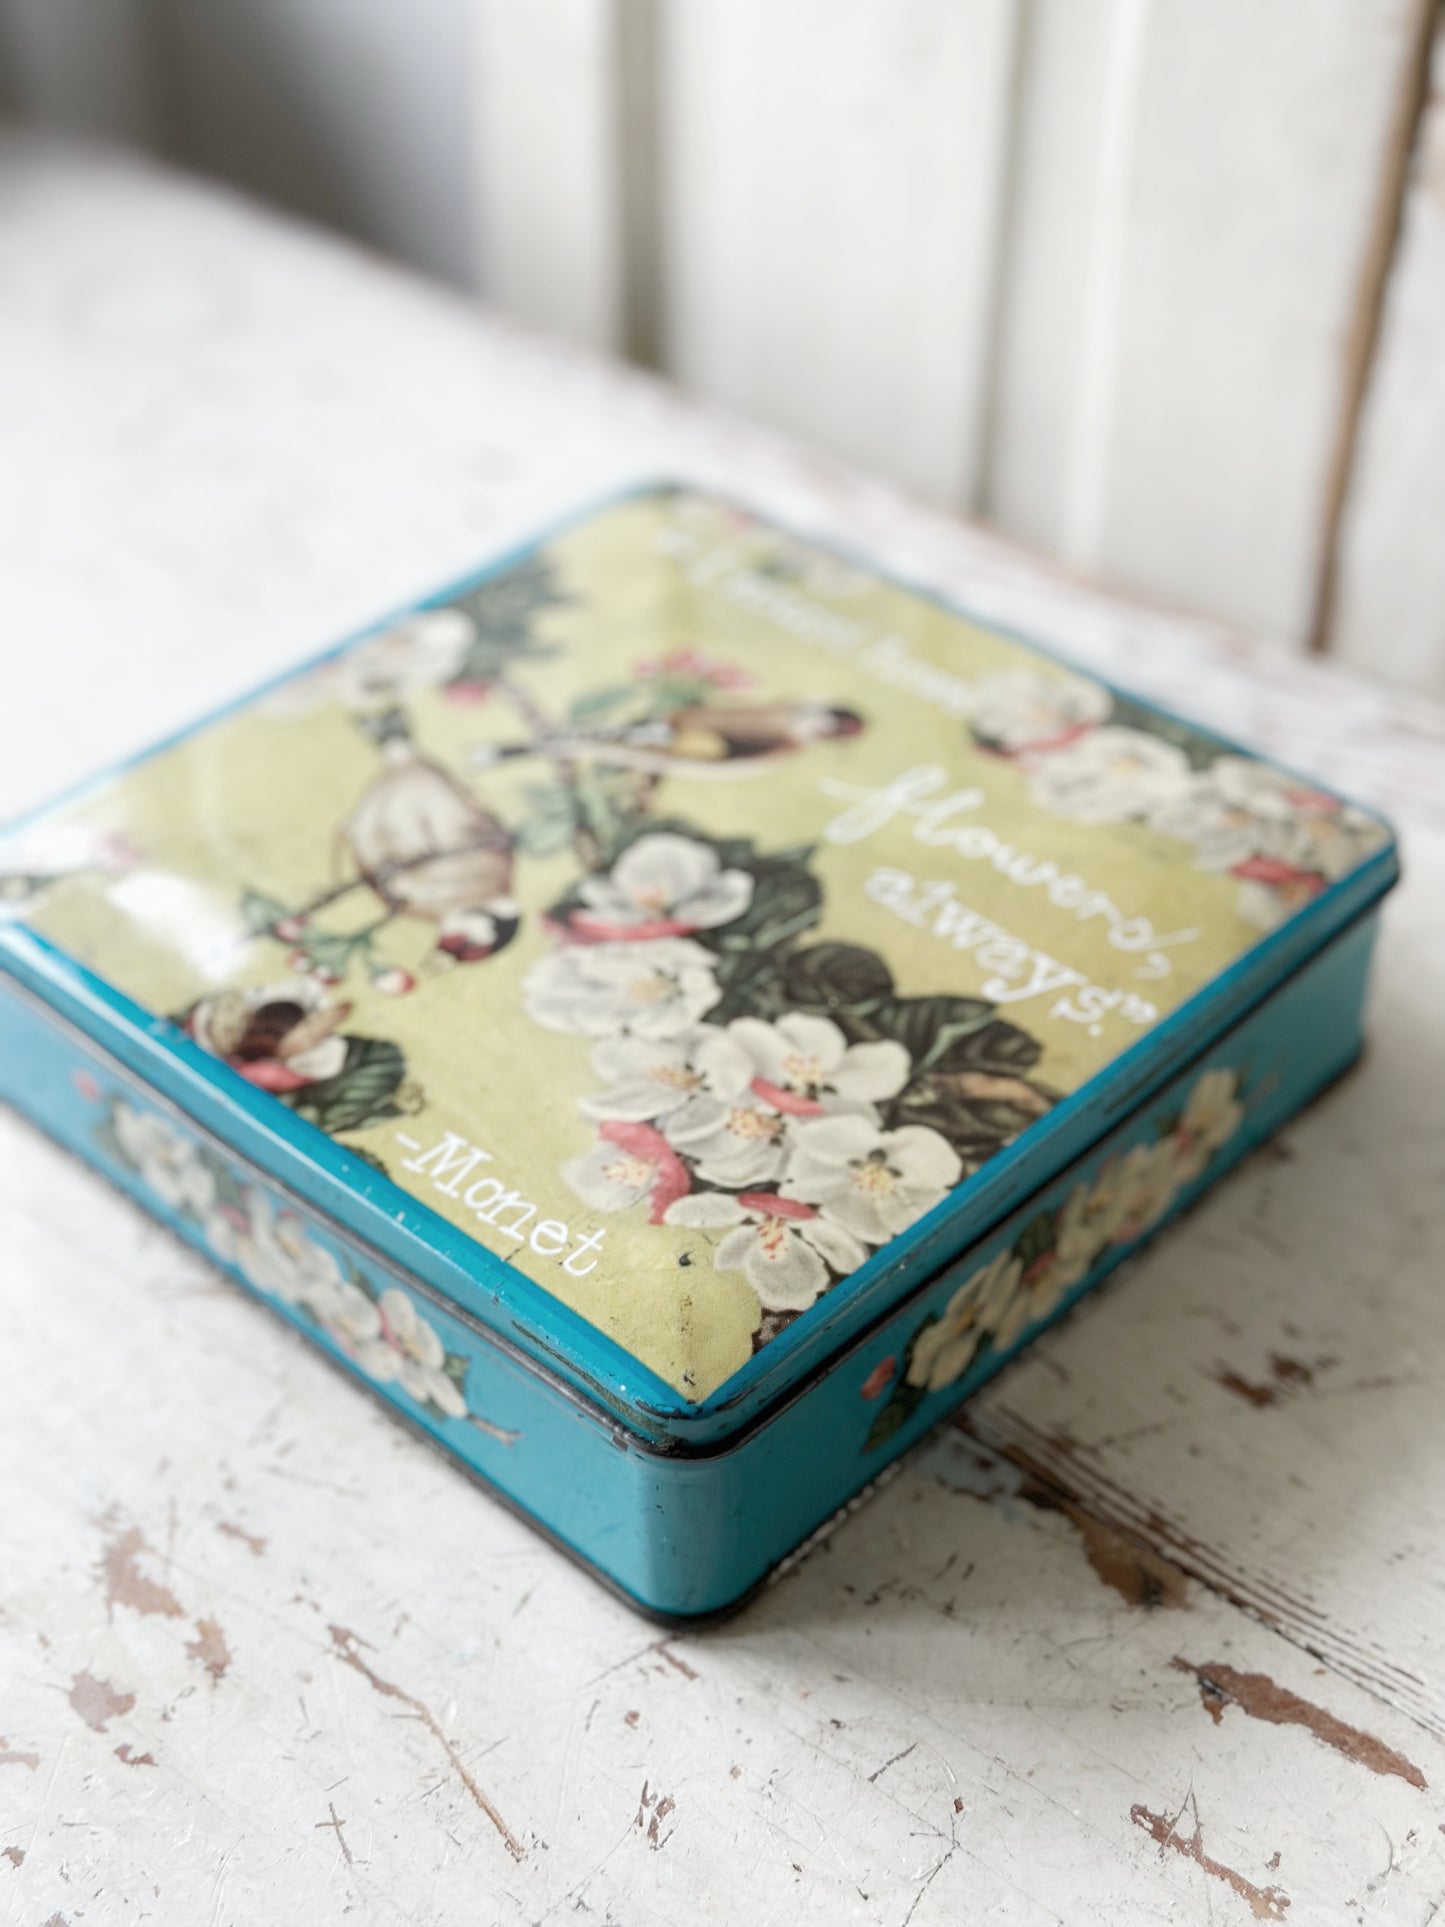 A pretty antique tin with a hand painted quote.